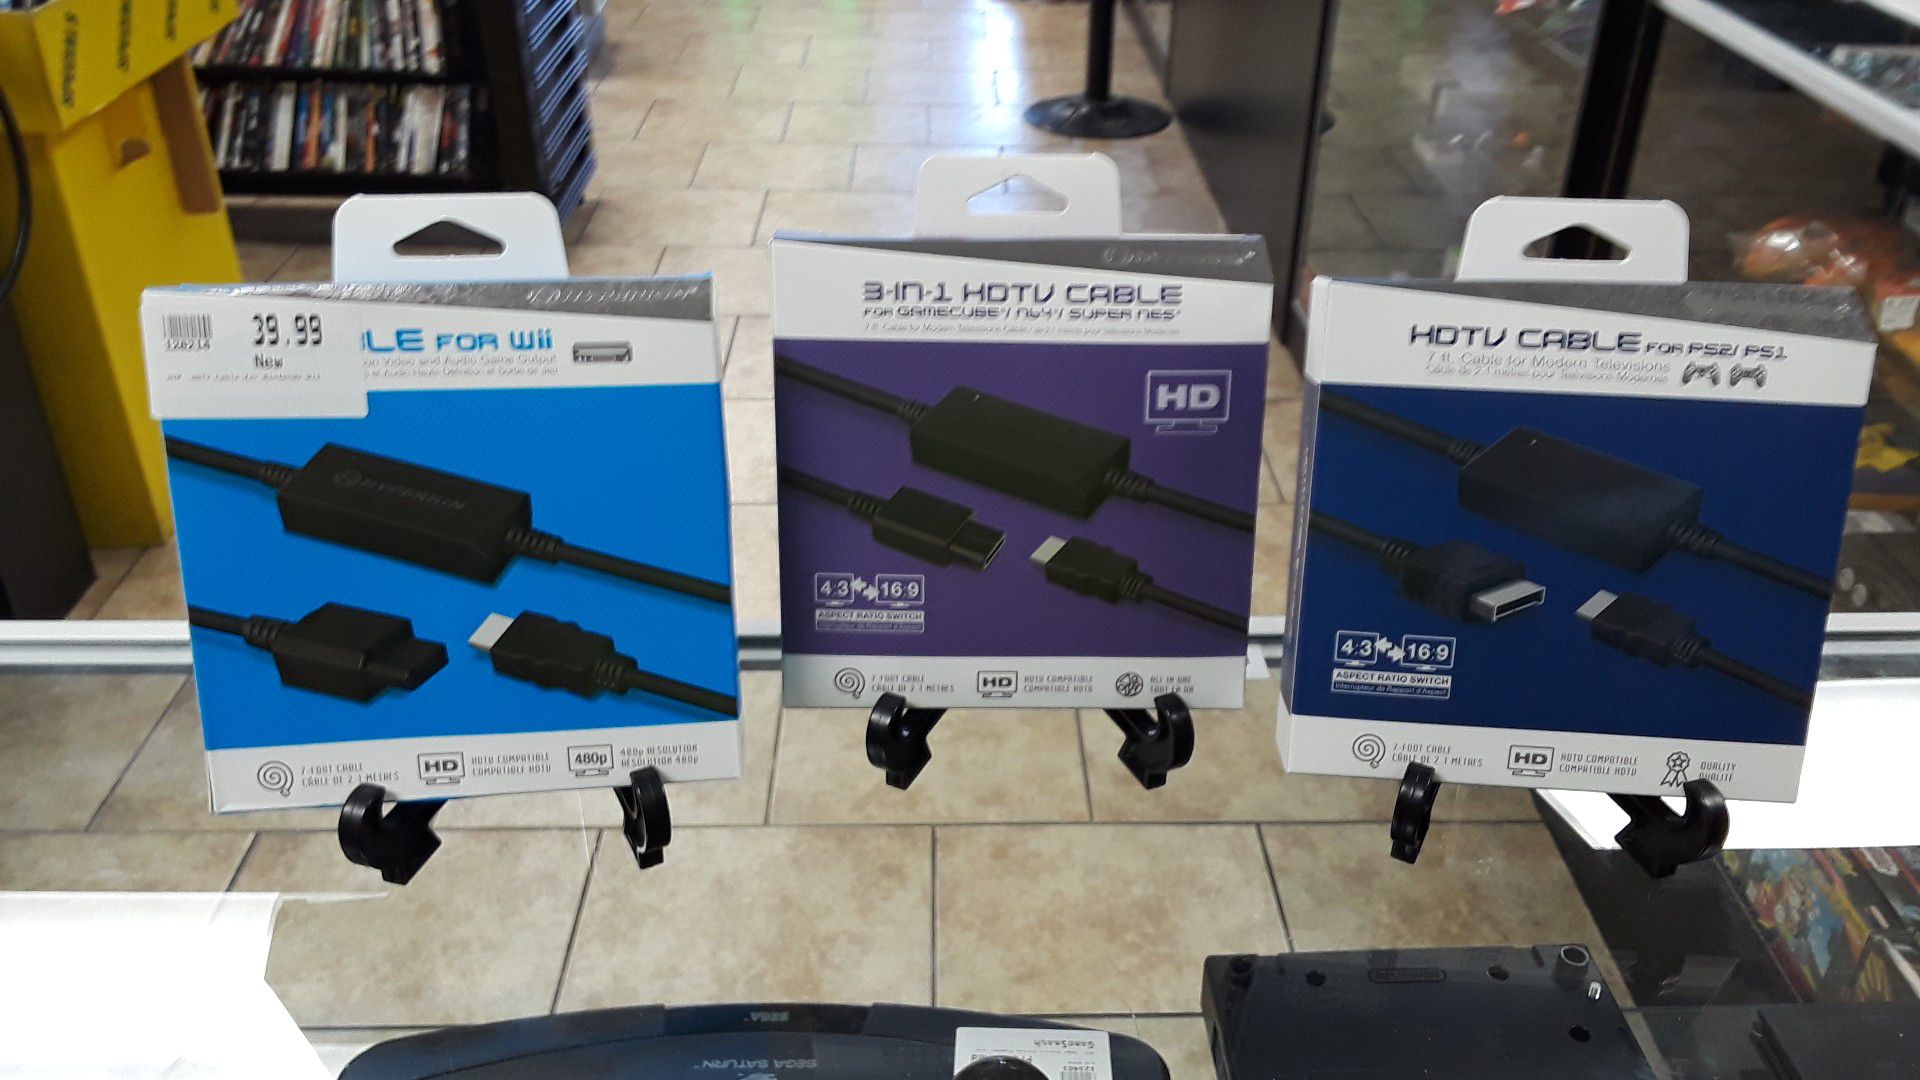 HDTV CABLE FOR PS2, WII, XBOX, GAMECUBE, AND MORE